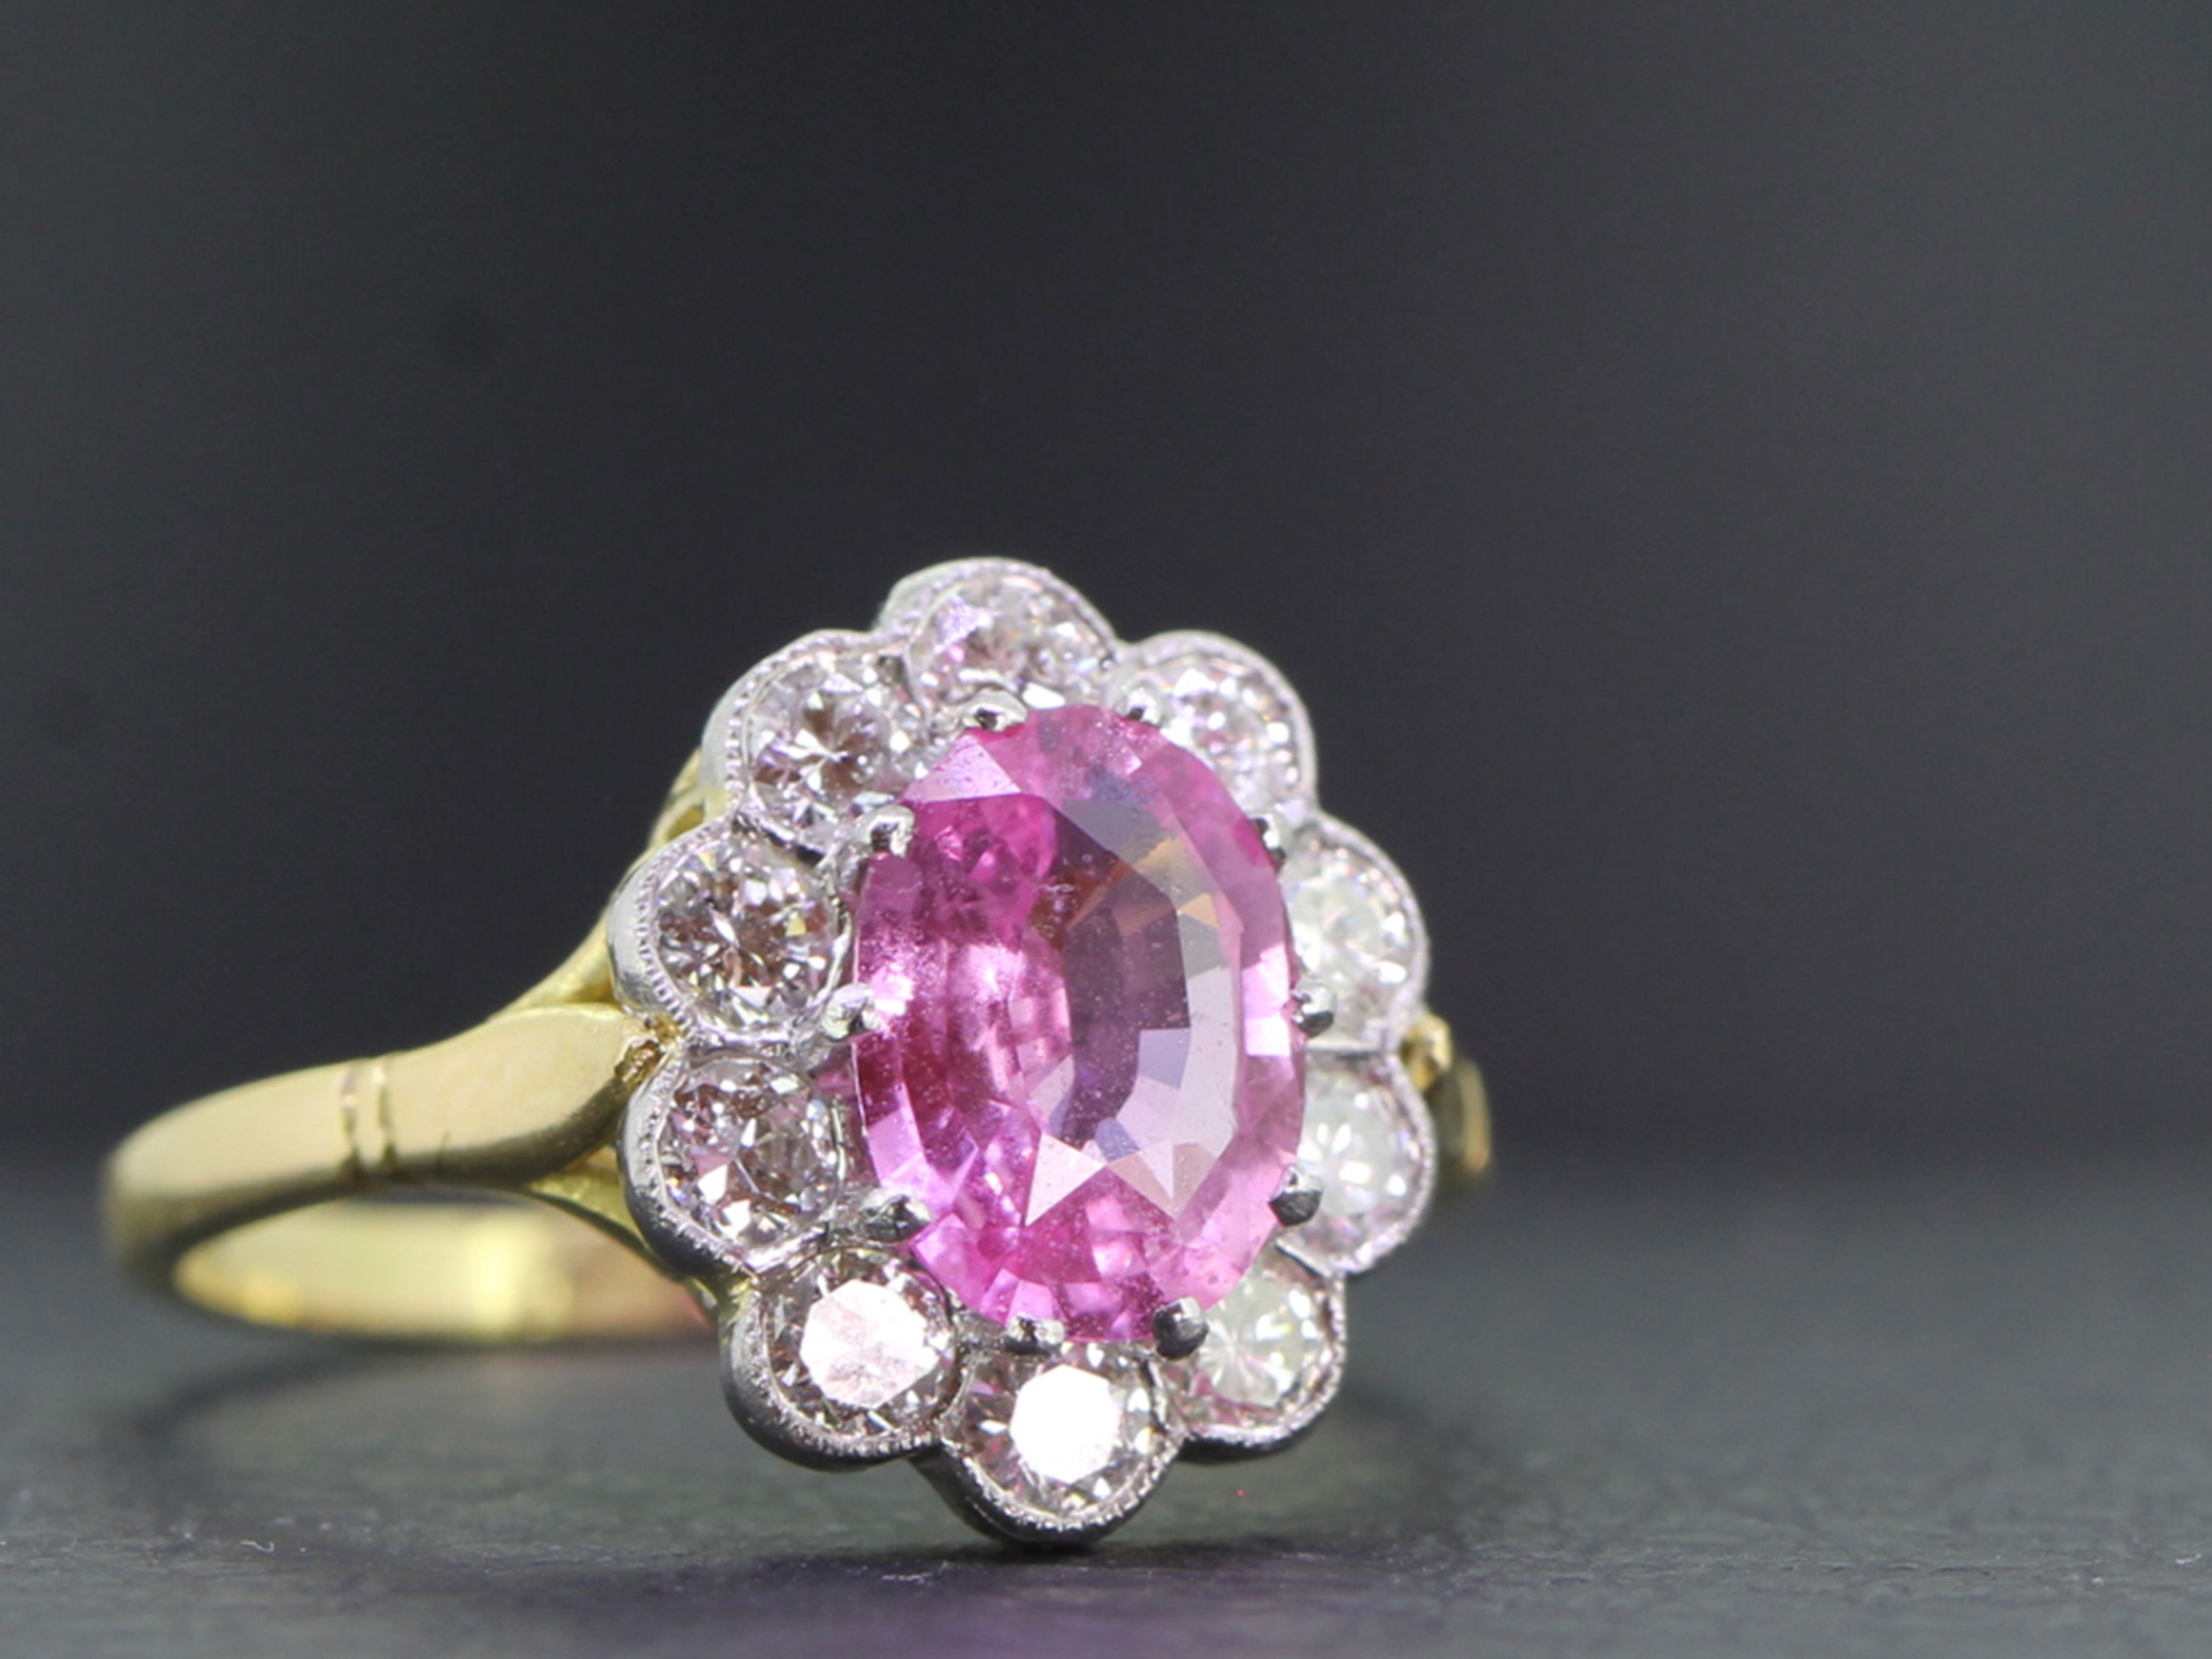 Stunning pink sapphire and diamond 18 carat gold and platinum cluster ring